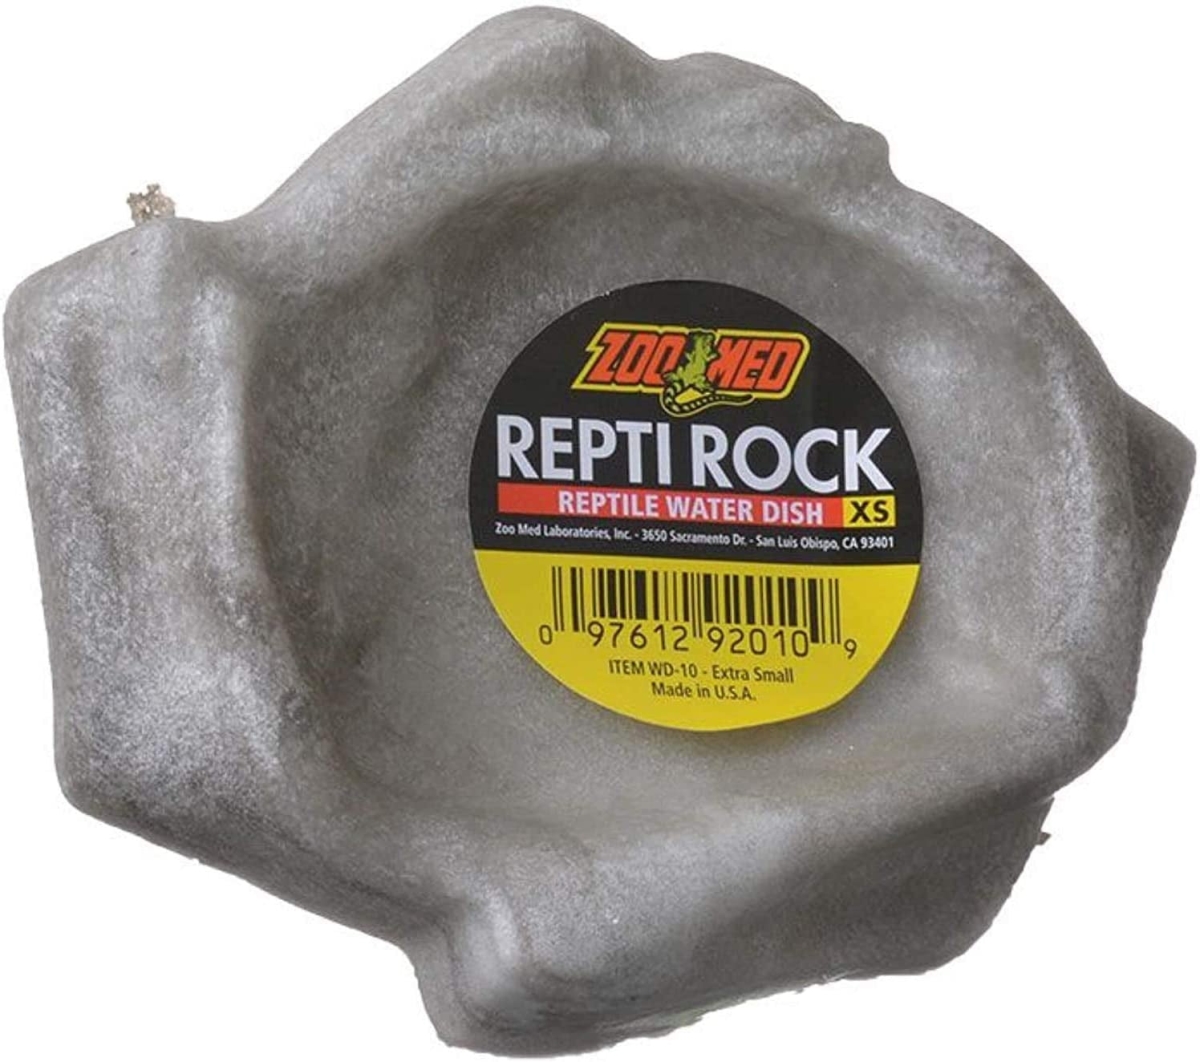 Picture of Zoo Med ZM92040M Repti Rock Reptile Water Dish